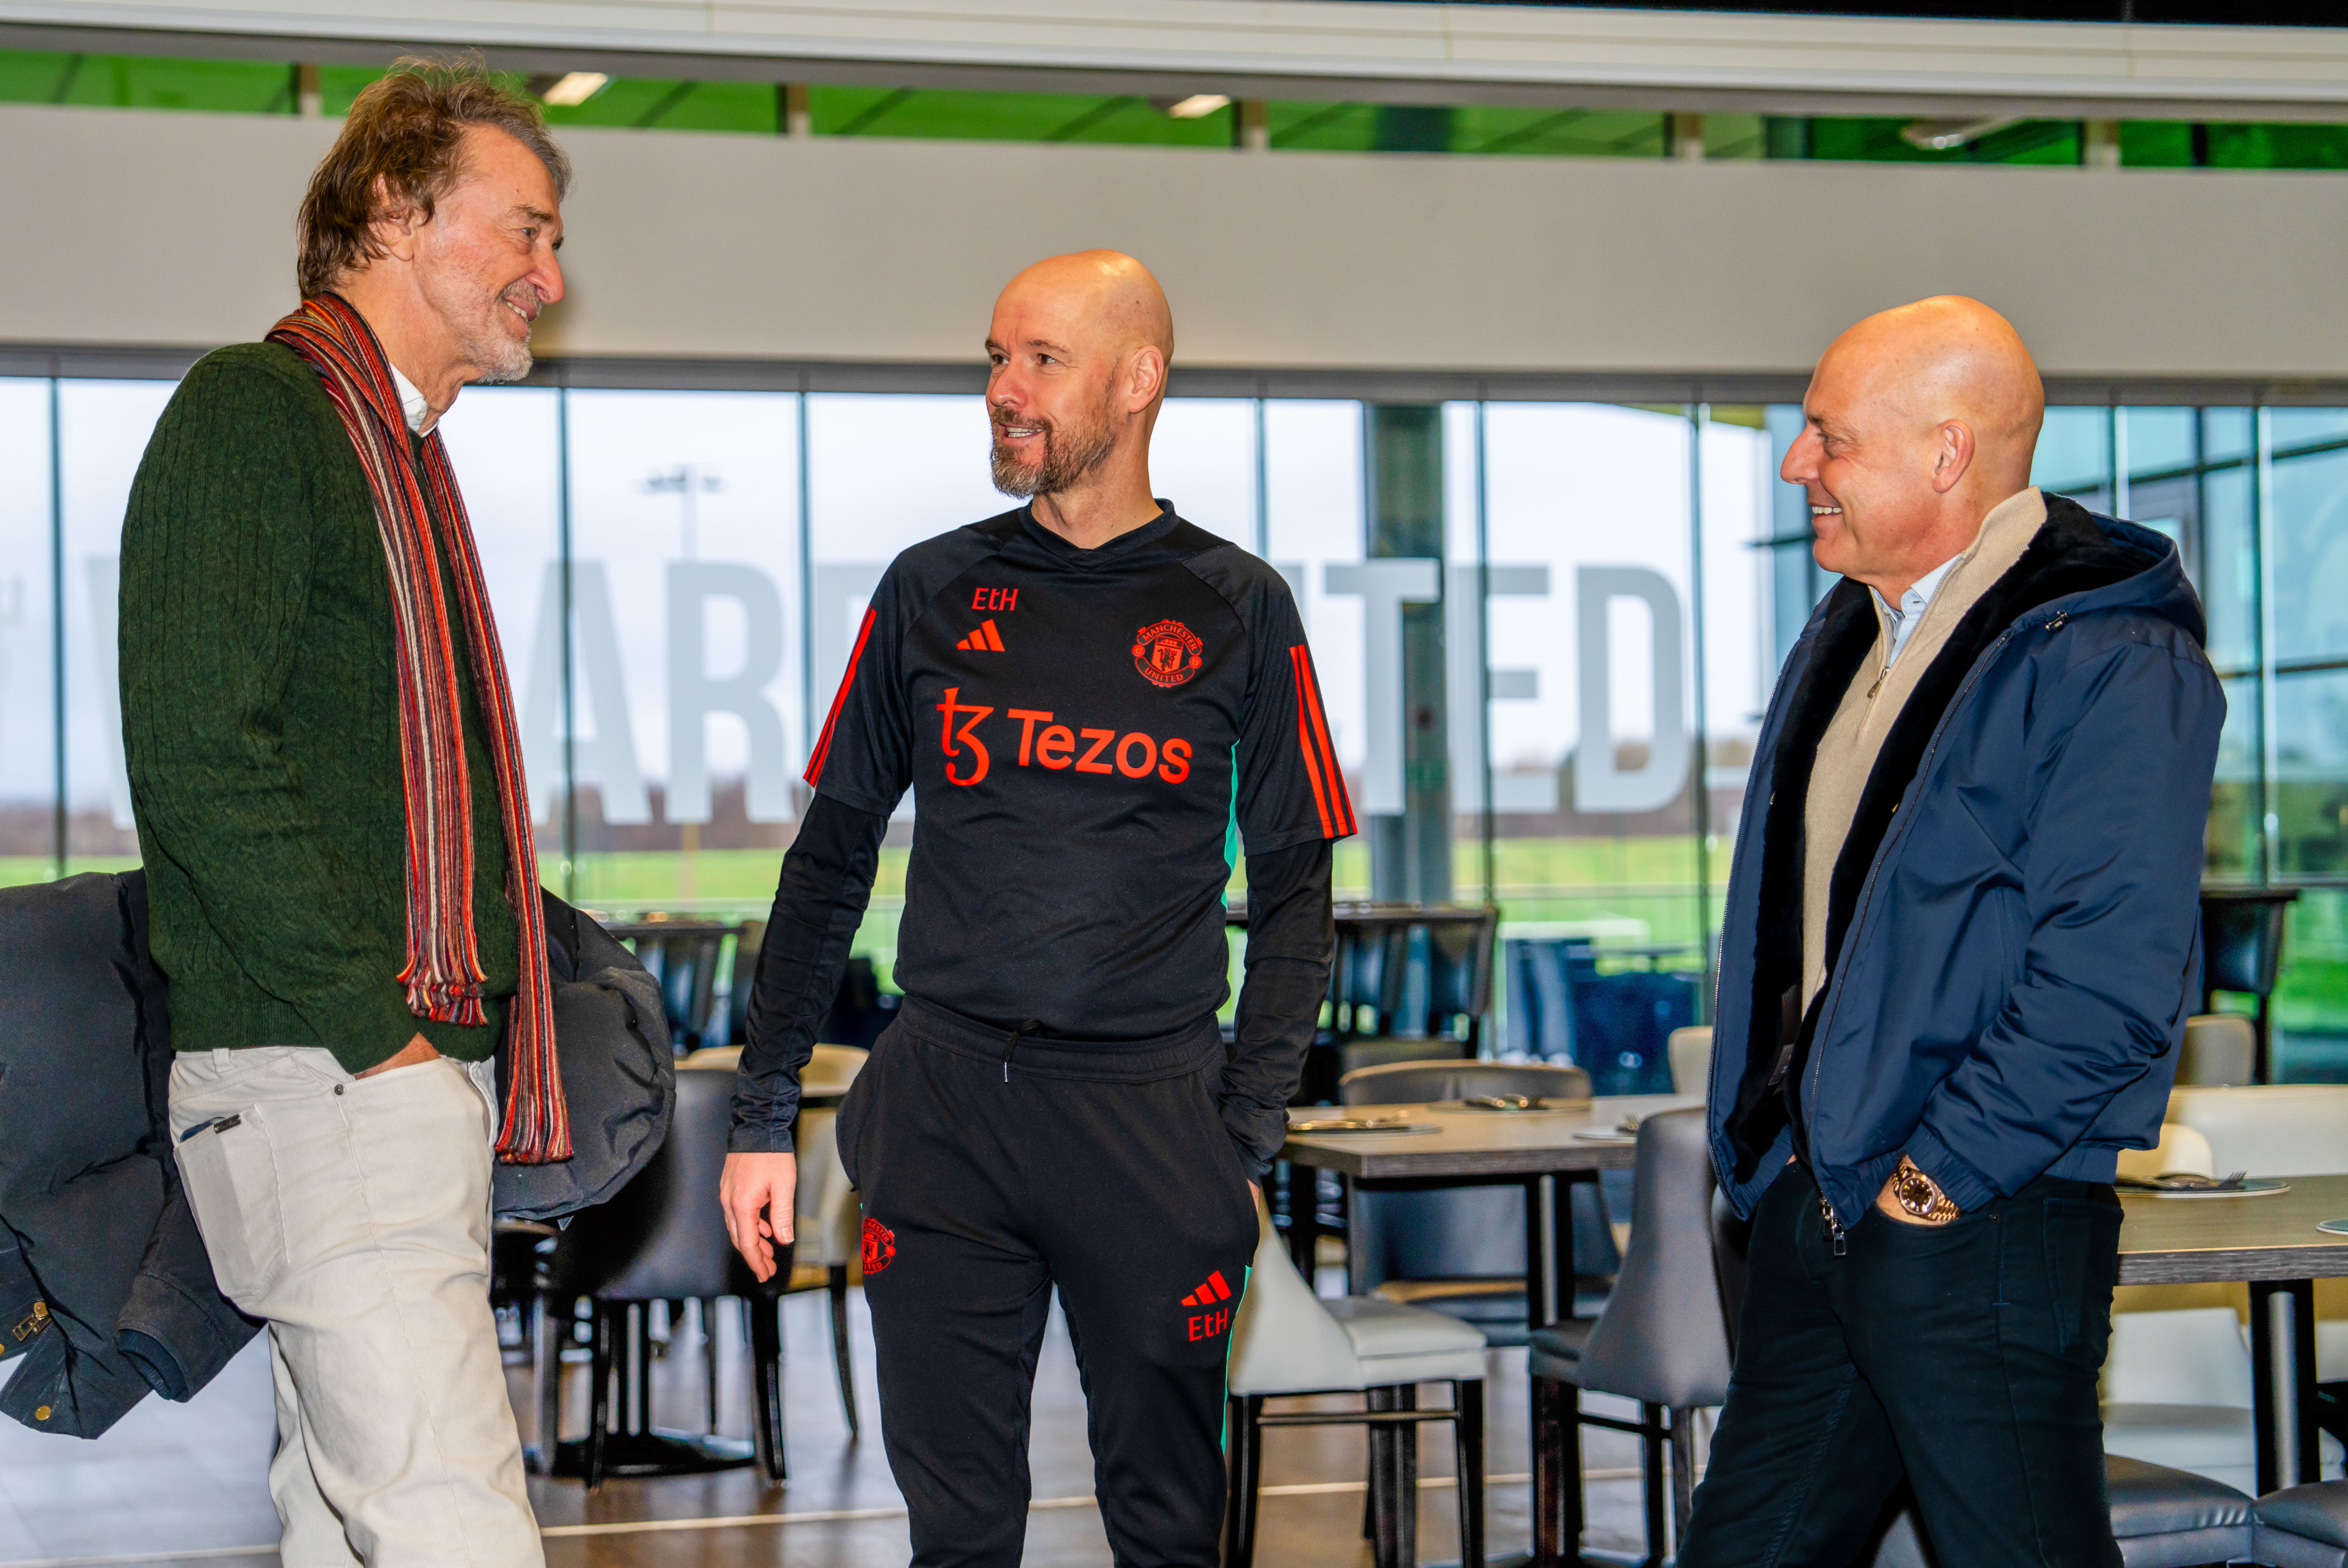 Sir Jim Ratcliffe and Sir Dave Brailsford of INEOS meet Manager Erik ten Hag of Manchester United in the staff restaurant at Carrington Training Complex